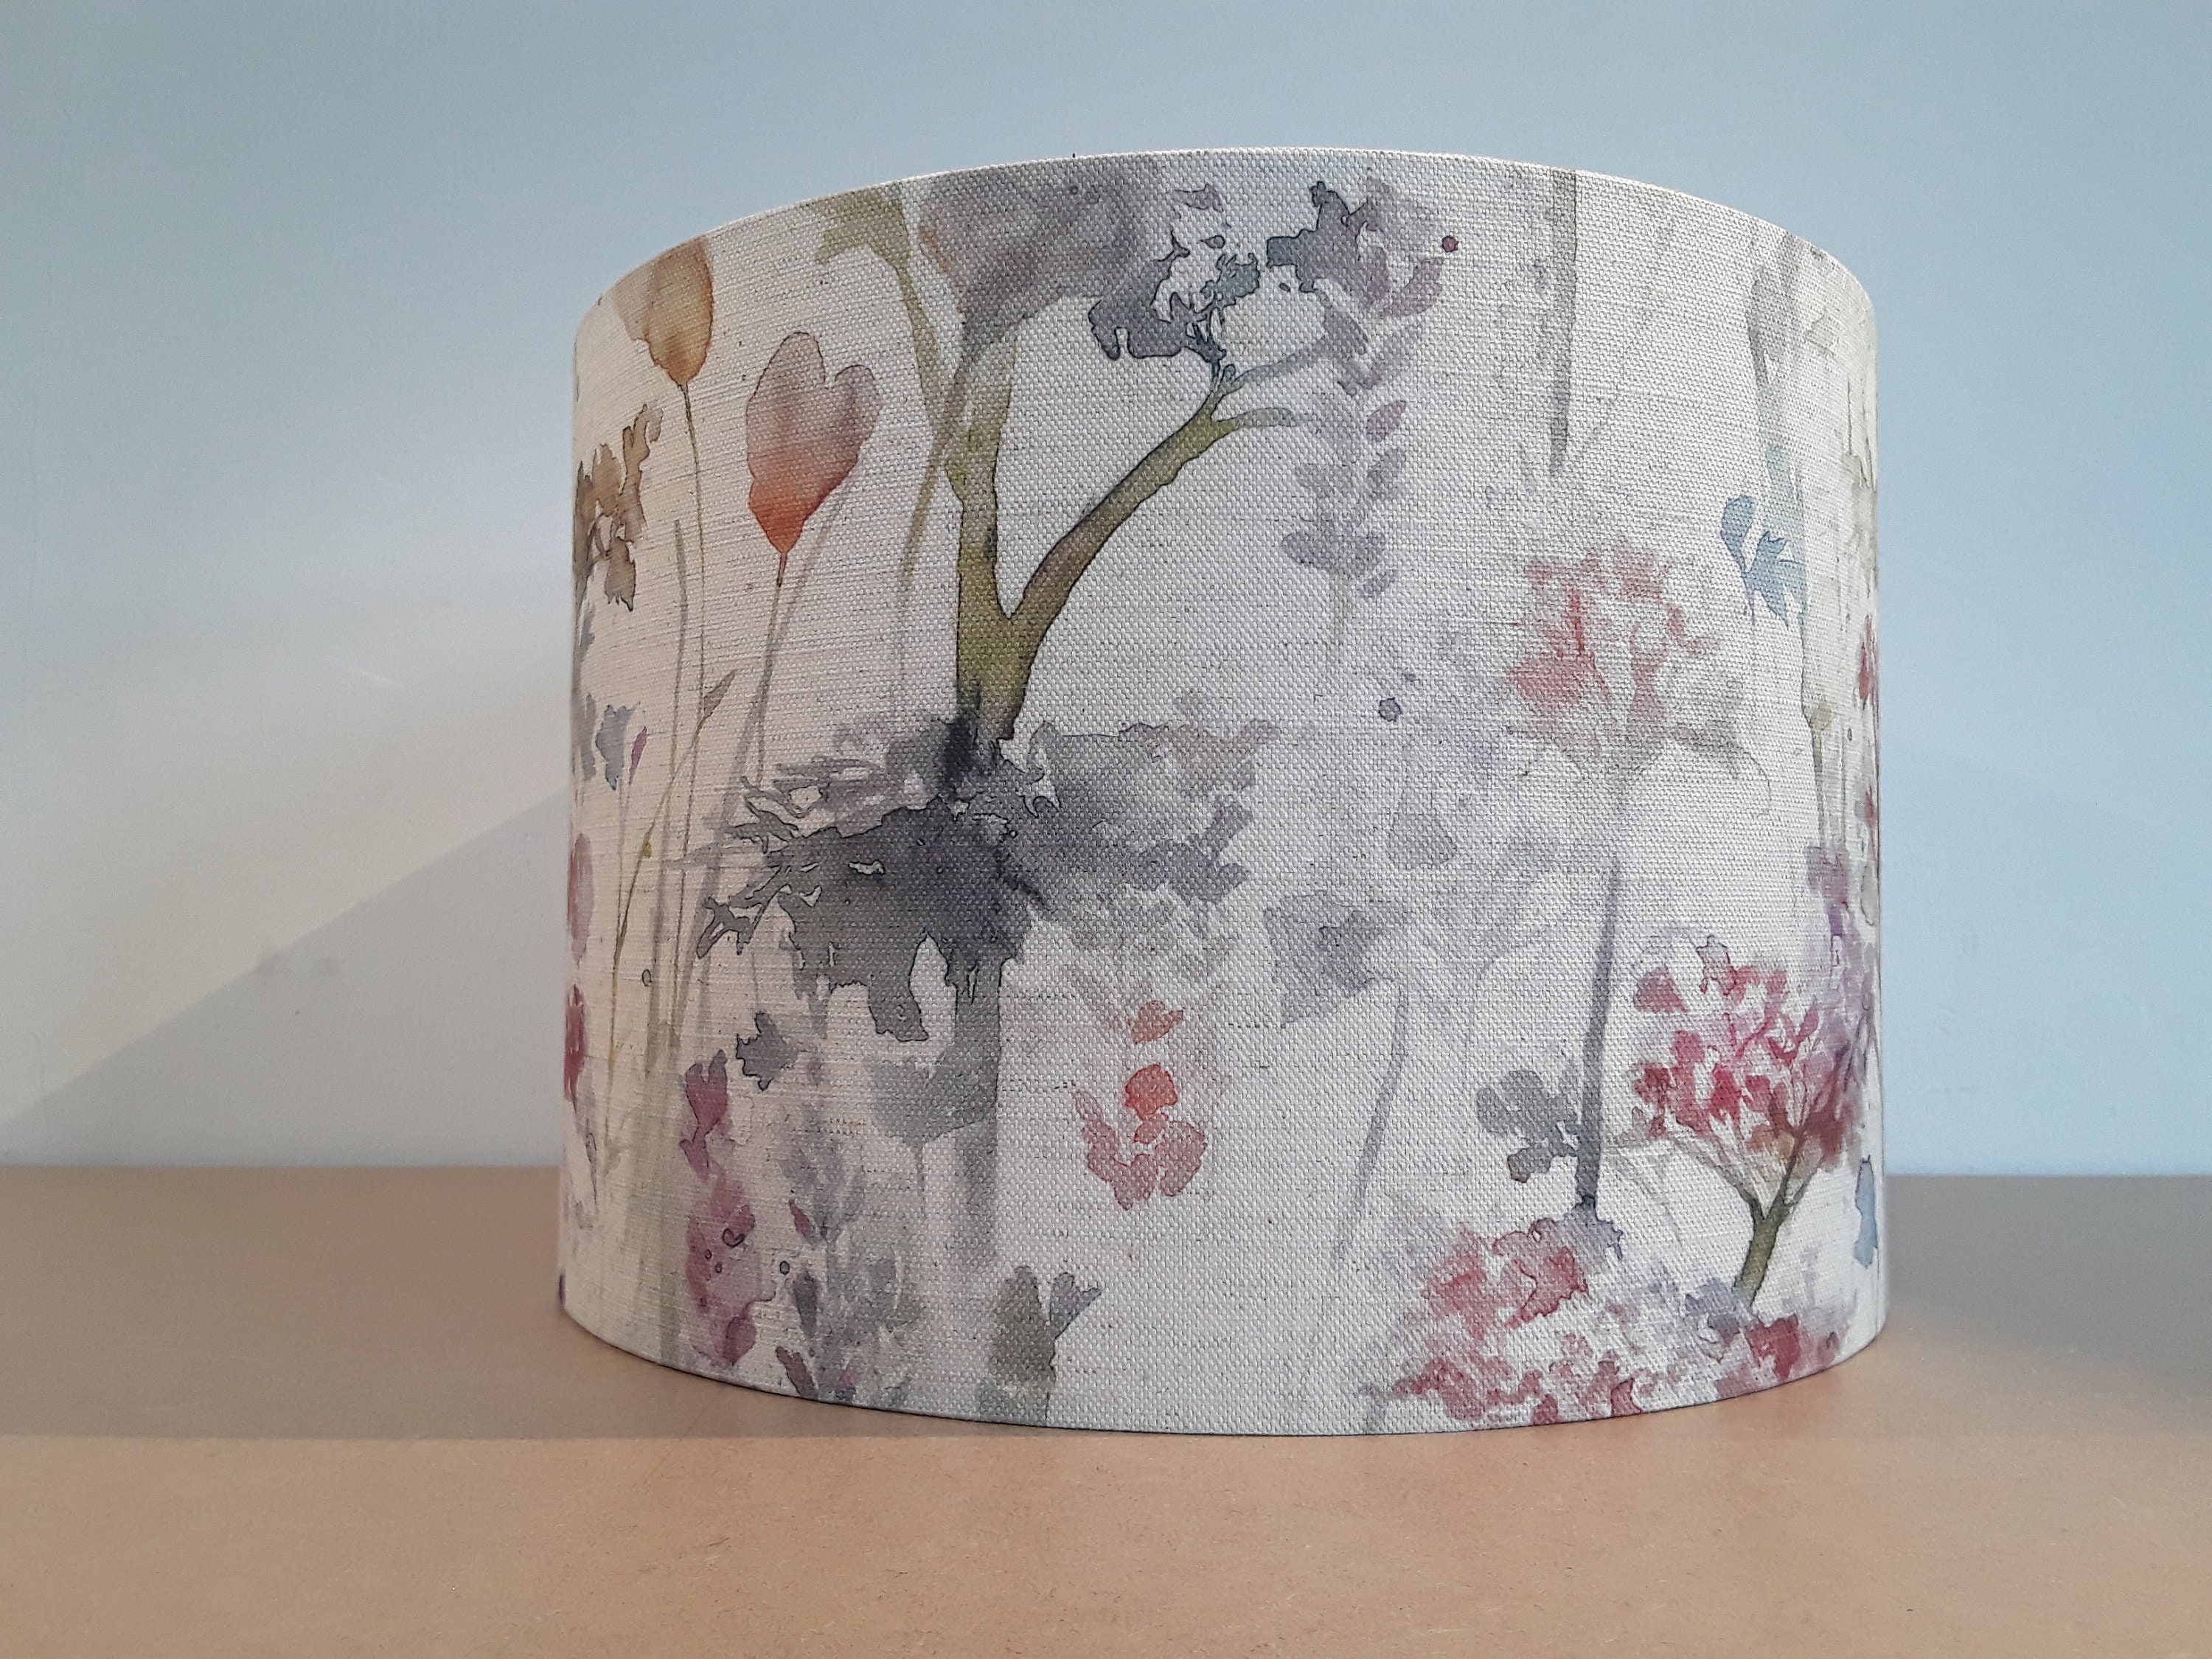 Details about   NEW HANDMADE LAMPSHADE VOYAGE DECORATION ILINIZAS SUMMER POPPY FLORAL 